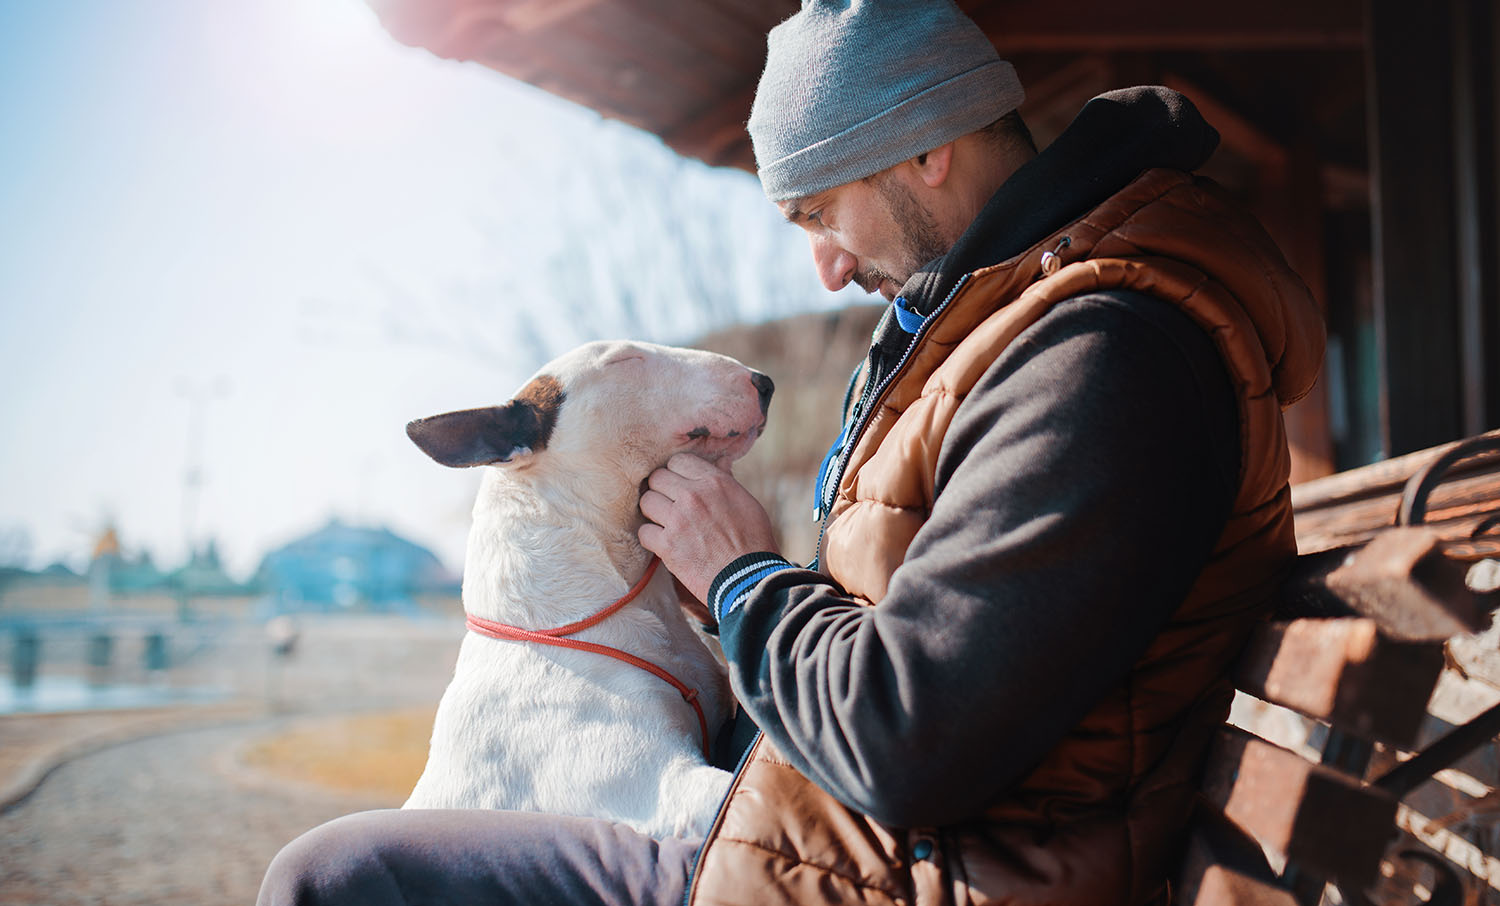 Why are dog owners happier people? A man bonding with his dog.